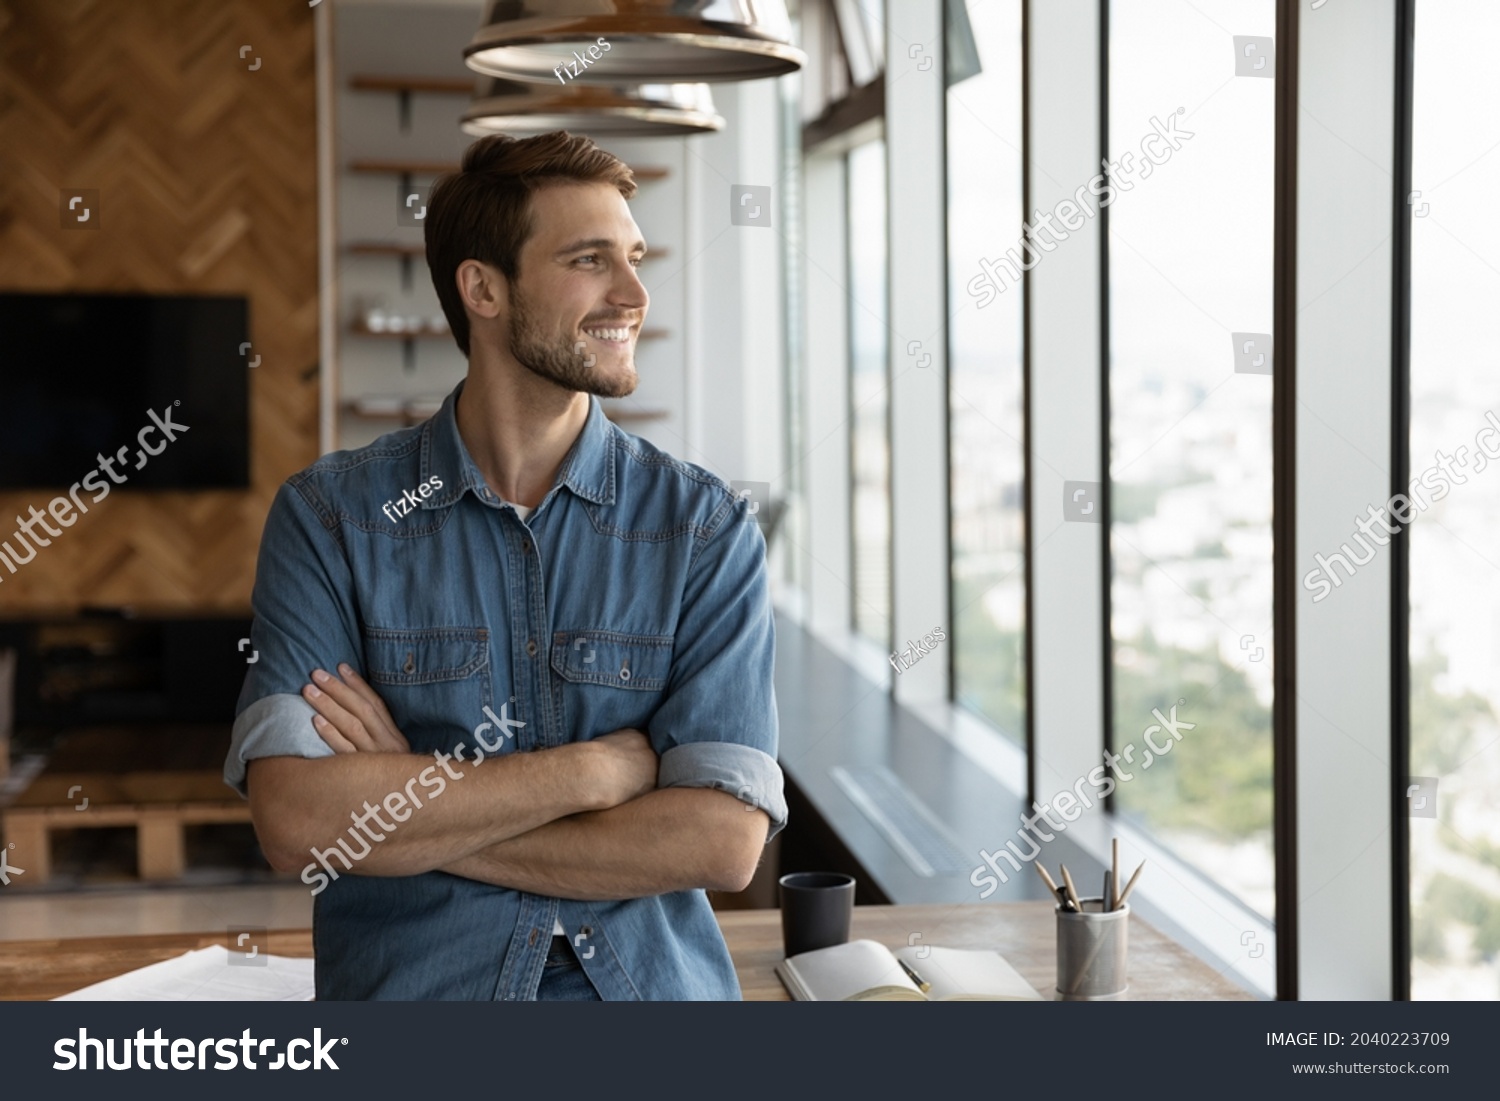 Smiling male employee stand at workplace look in window distance thinking pondering of future caress opportunities perspectives. Happy man imagine visualize success. Business vision concept. #2040223709